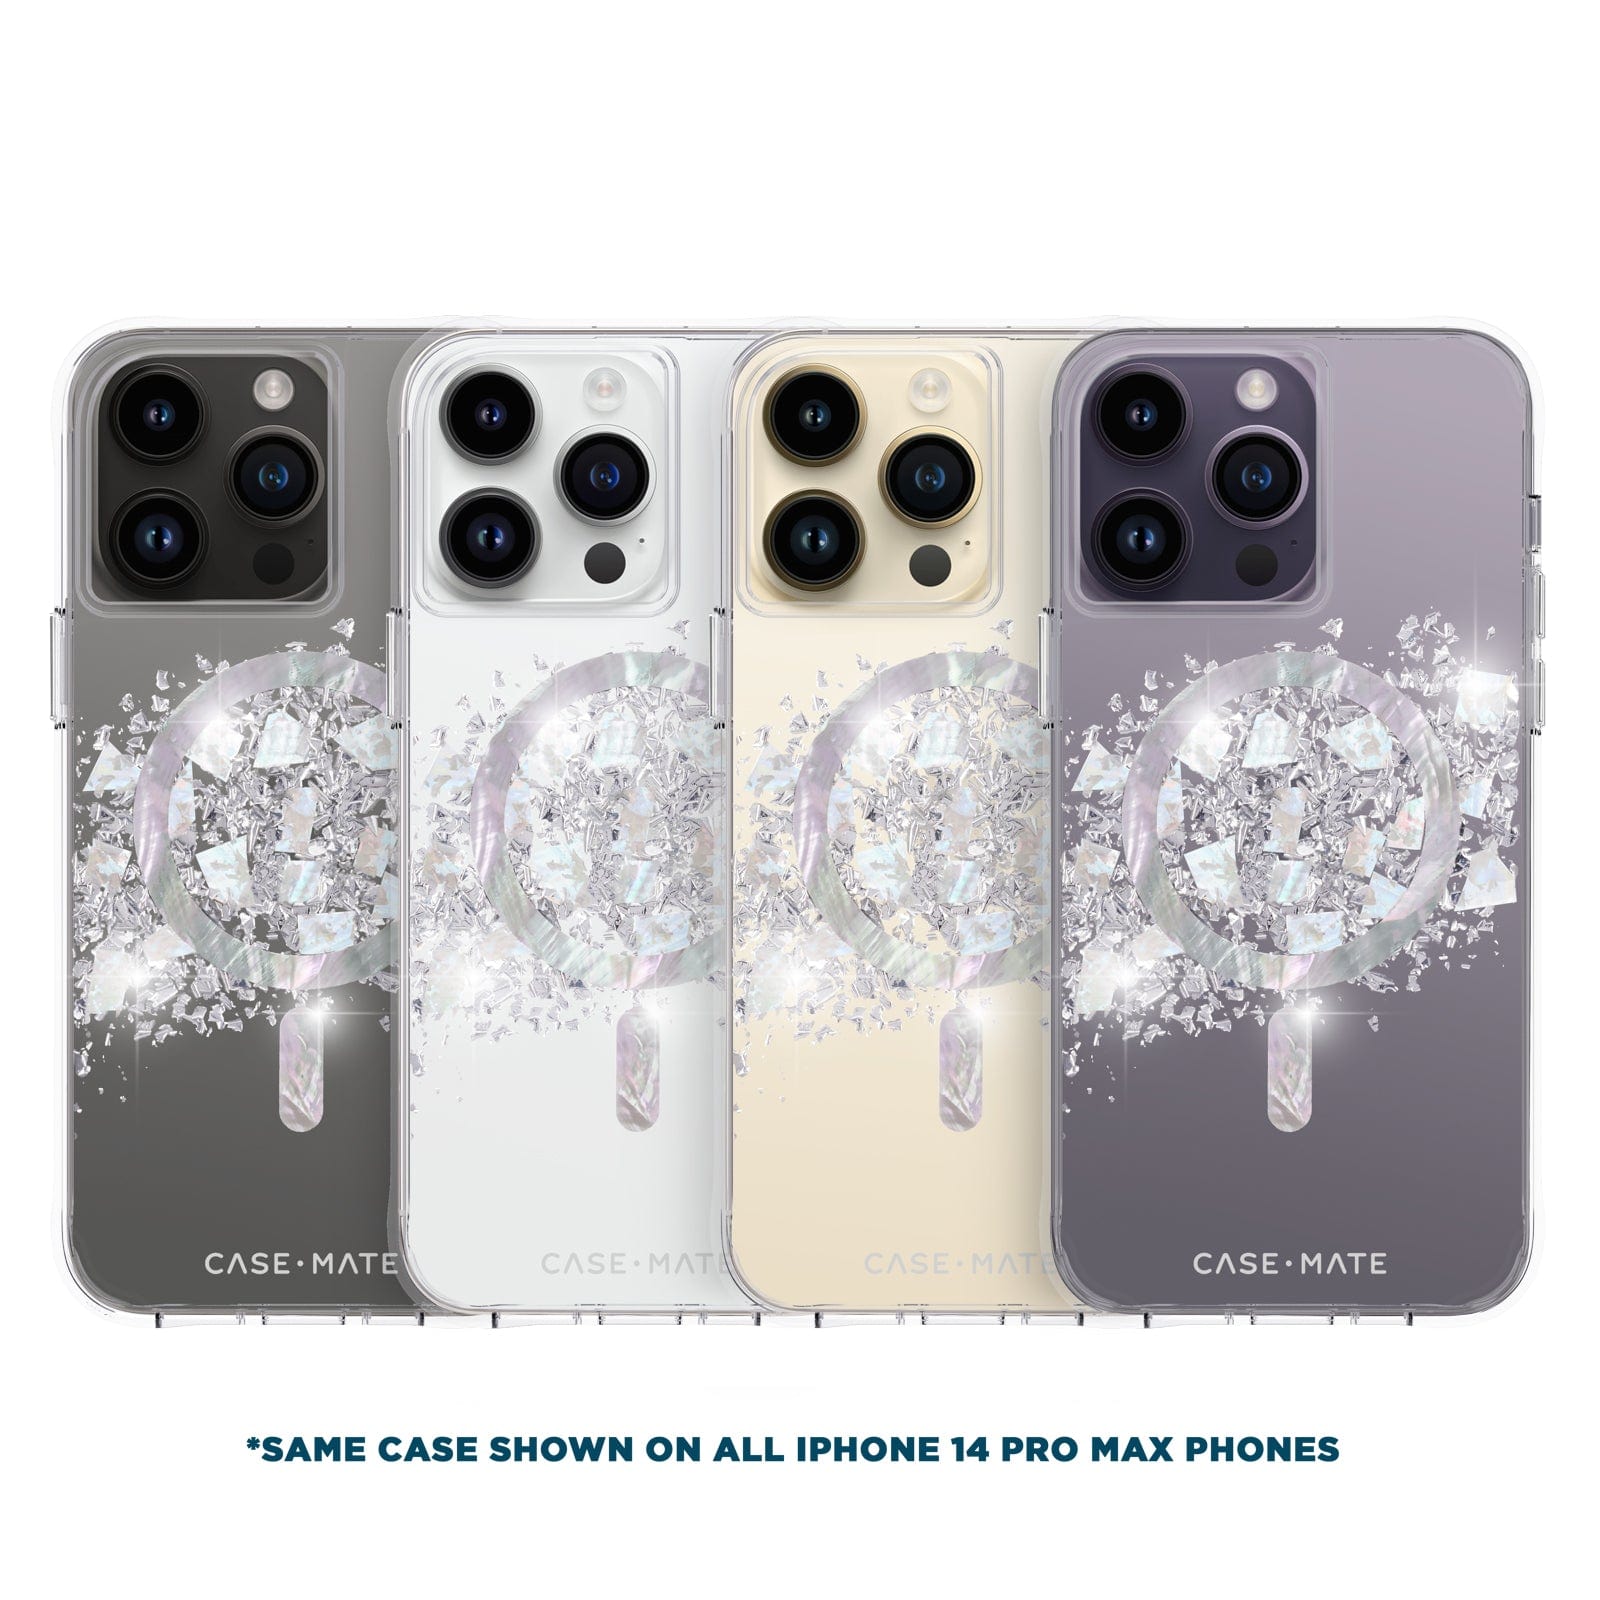 *SAME CASE SHOWN ON ALL IPHONE 14 PRO MAX PHONES